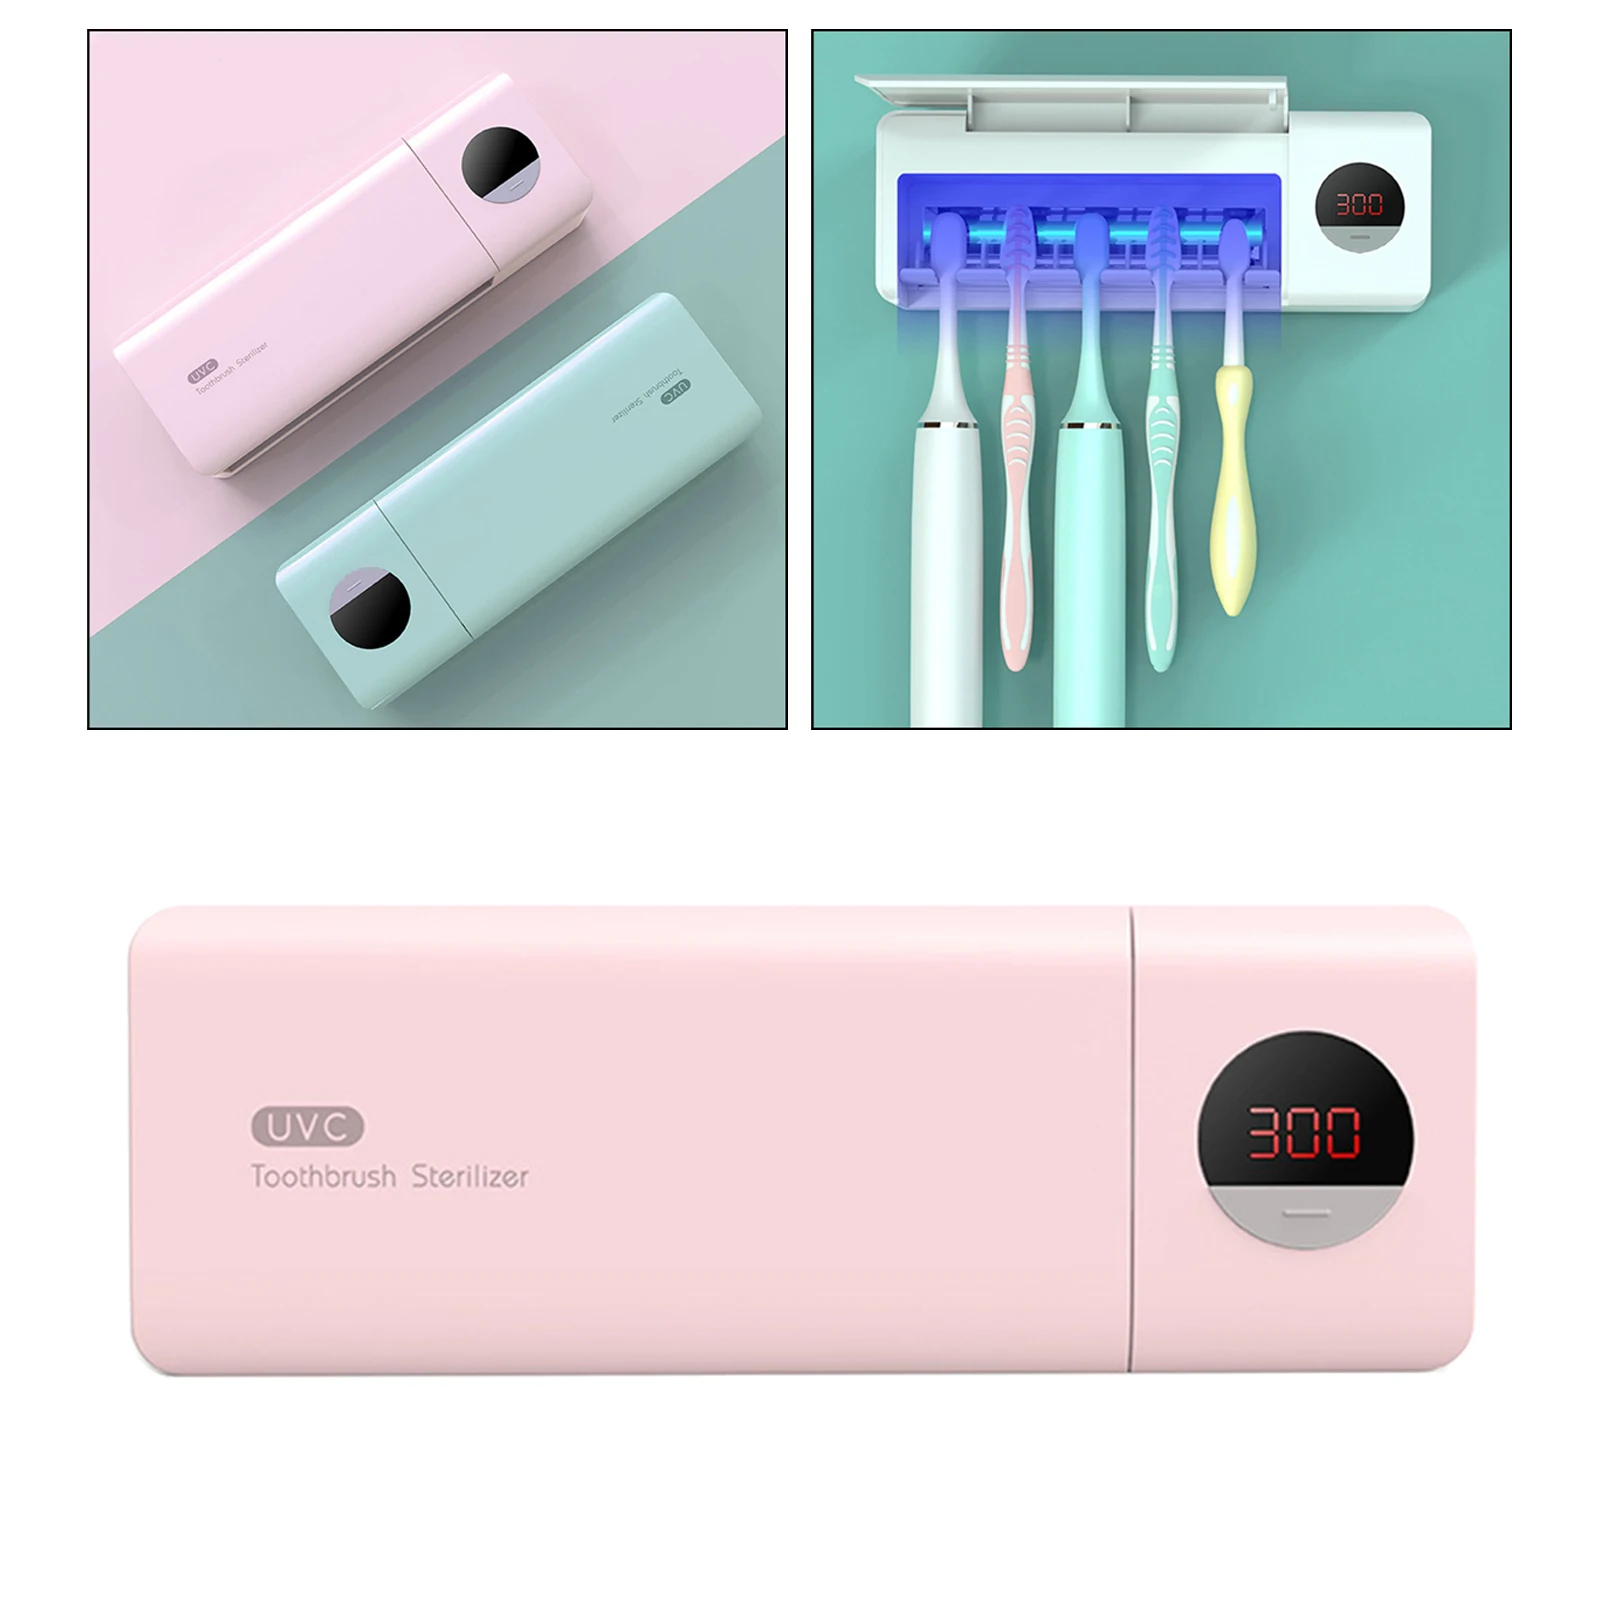 UV Toothbrush Sanitizer Case Portable Toothbrush Holder Fits All Toothbrushes for Home Travel Drilling-Free